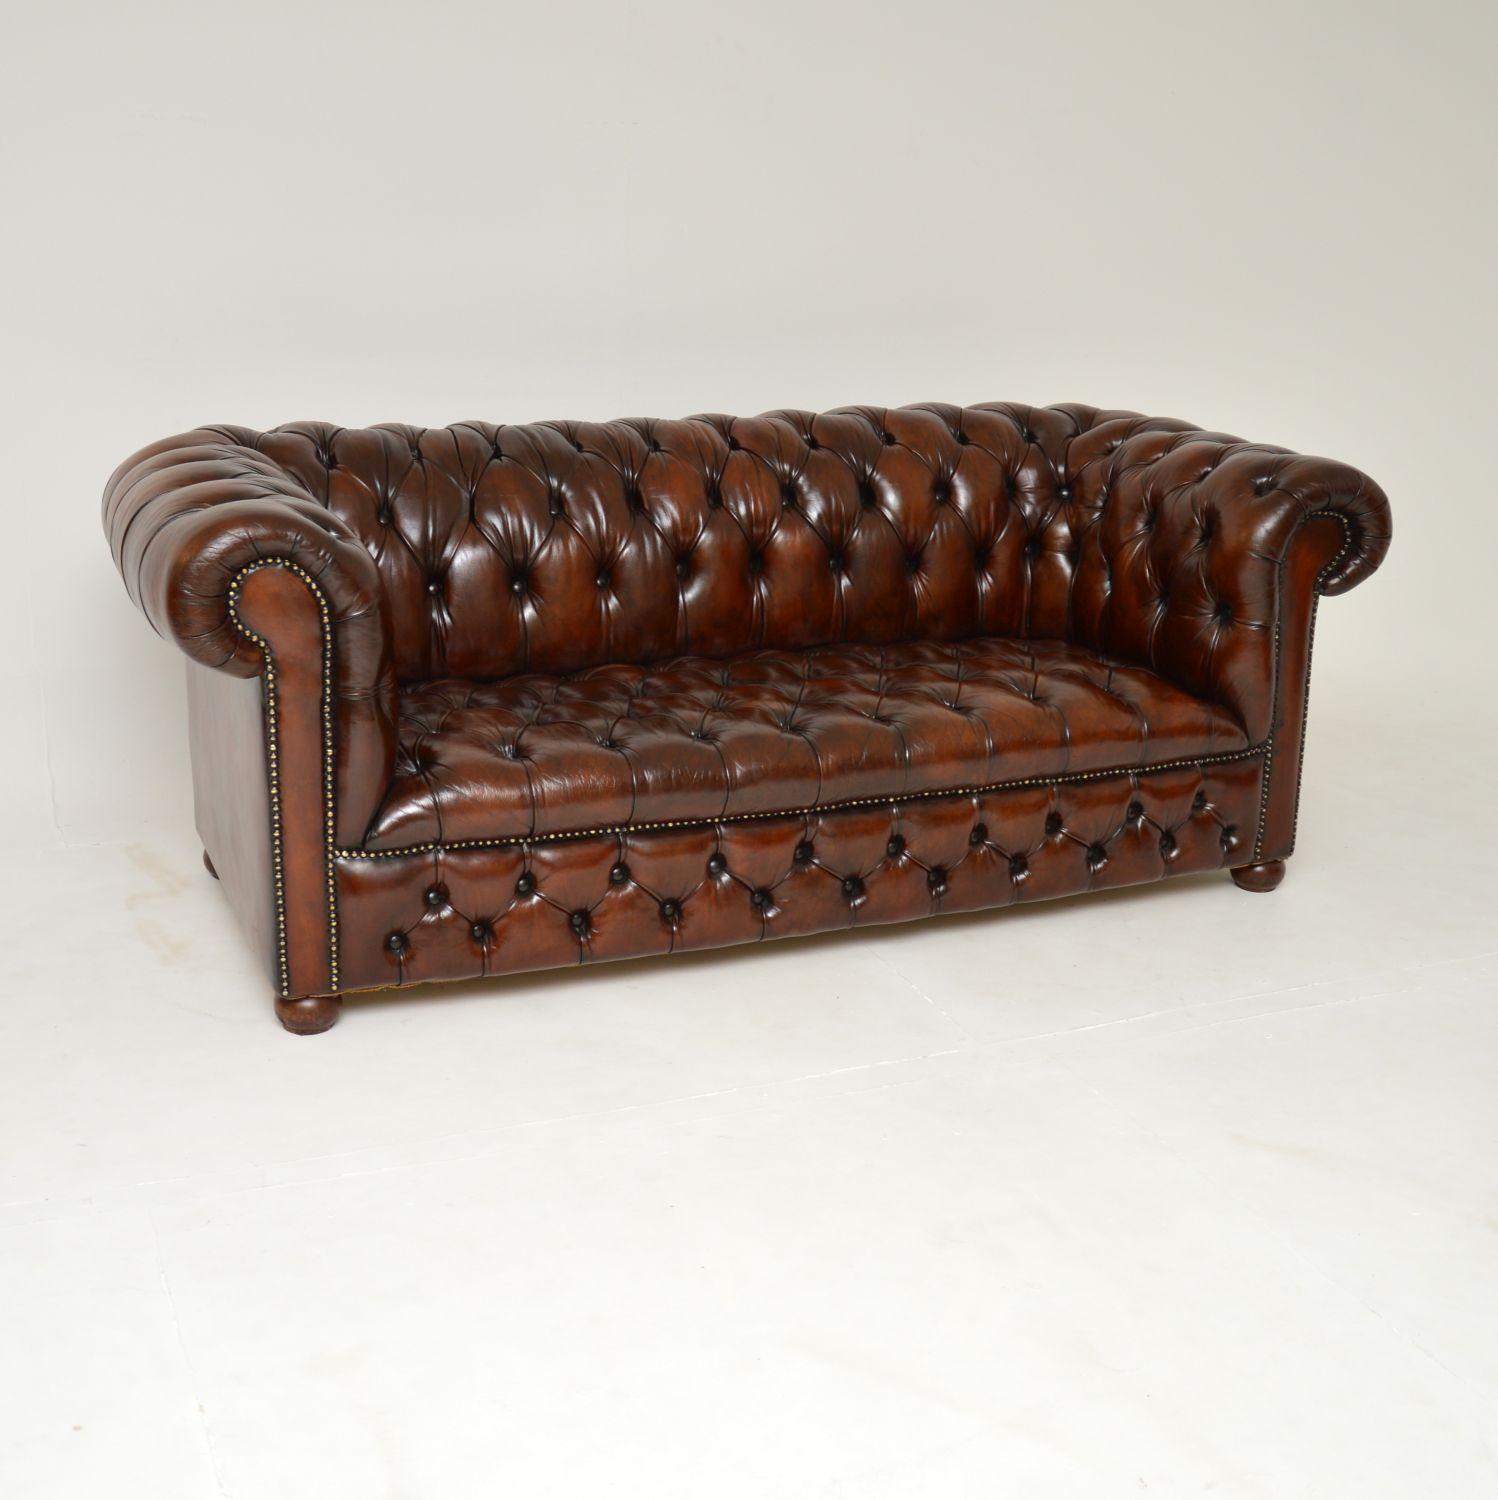 Victorian Pair of Antique Leather Chesterfield Sofas